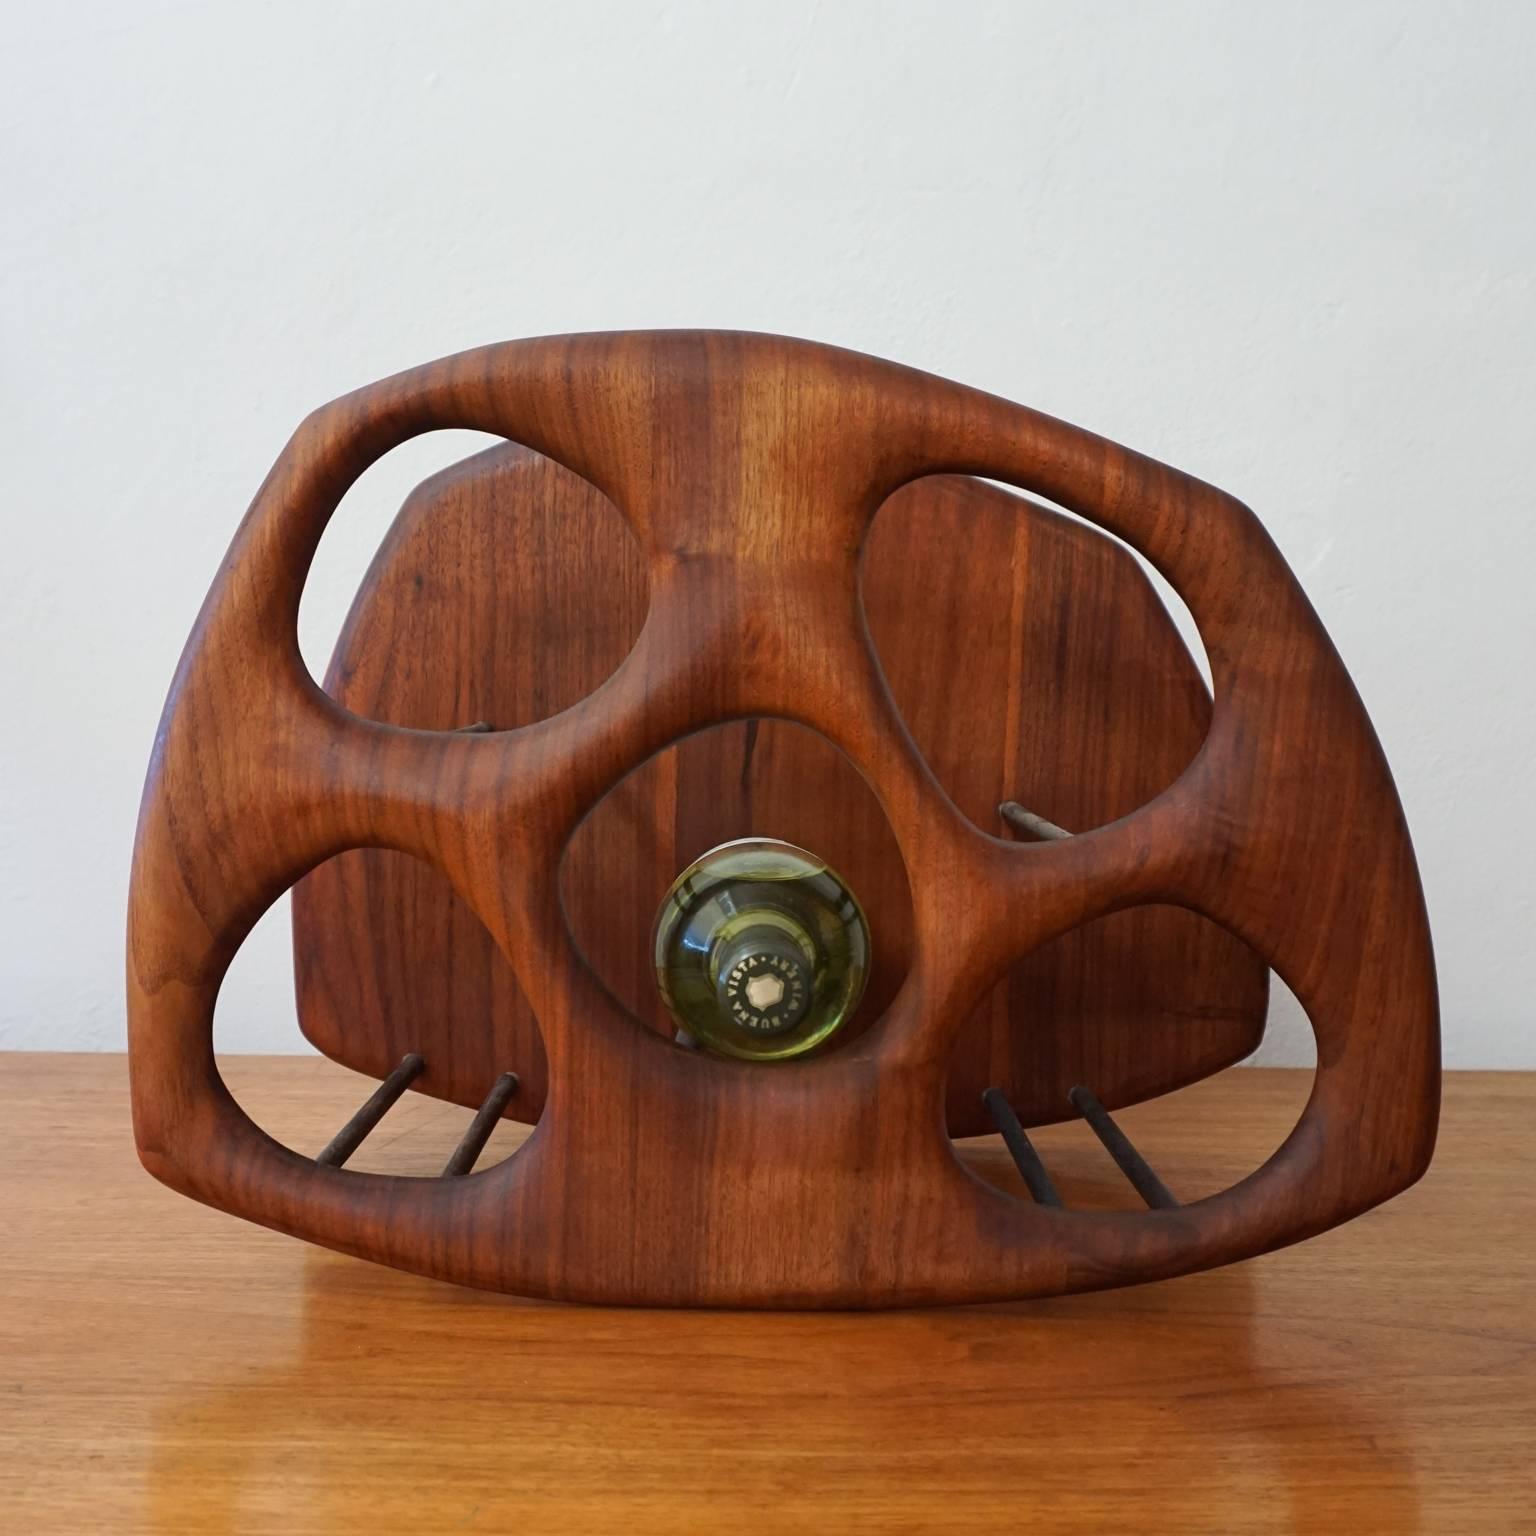 Handmade solid walnut wall-mounted wine rack. Skillfully crafted.

Designed by California woodworker, Dean Santner. Dean recounts selling the racks, early in his career, in front of Cody’s Bookstore on Berkeley’s Telegraph Avenue in 1970-1971.